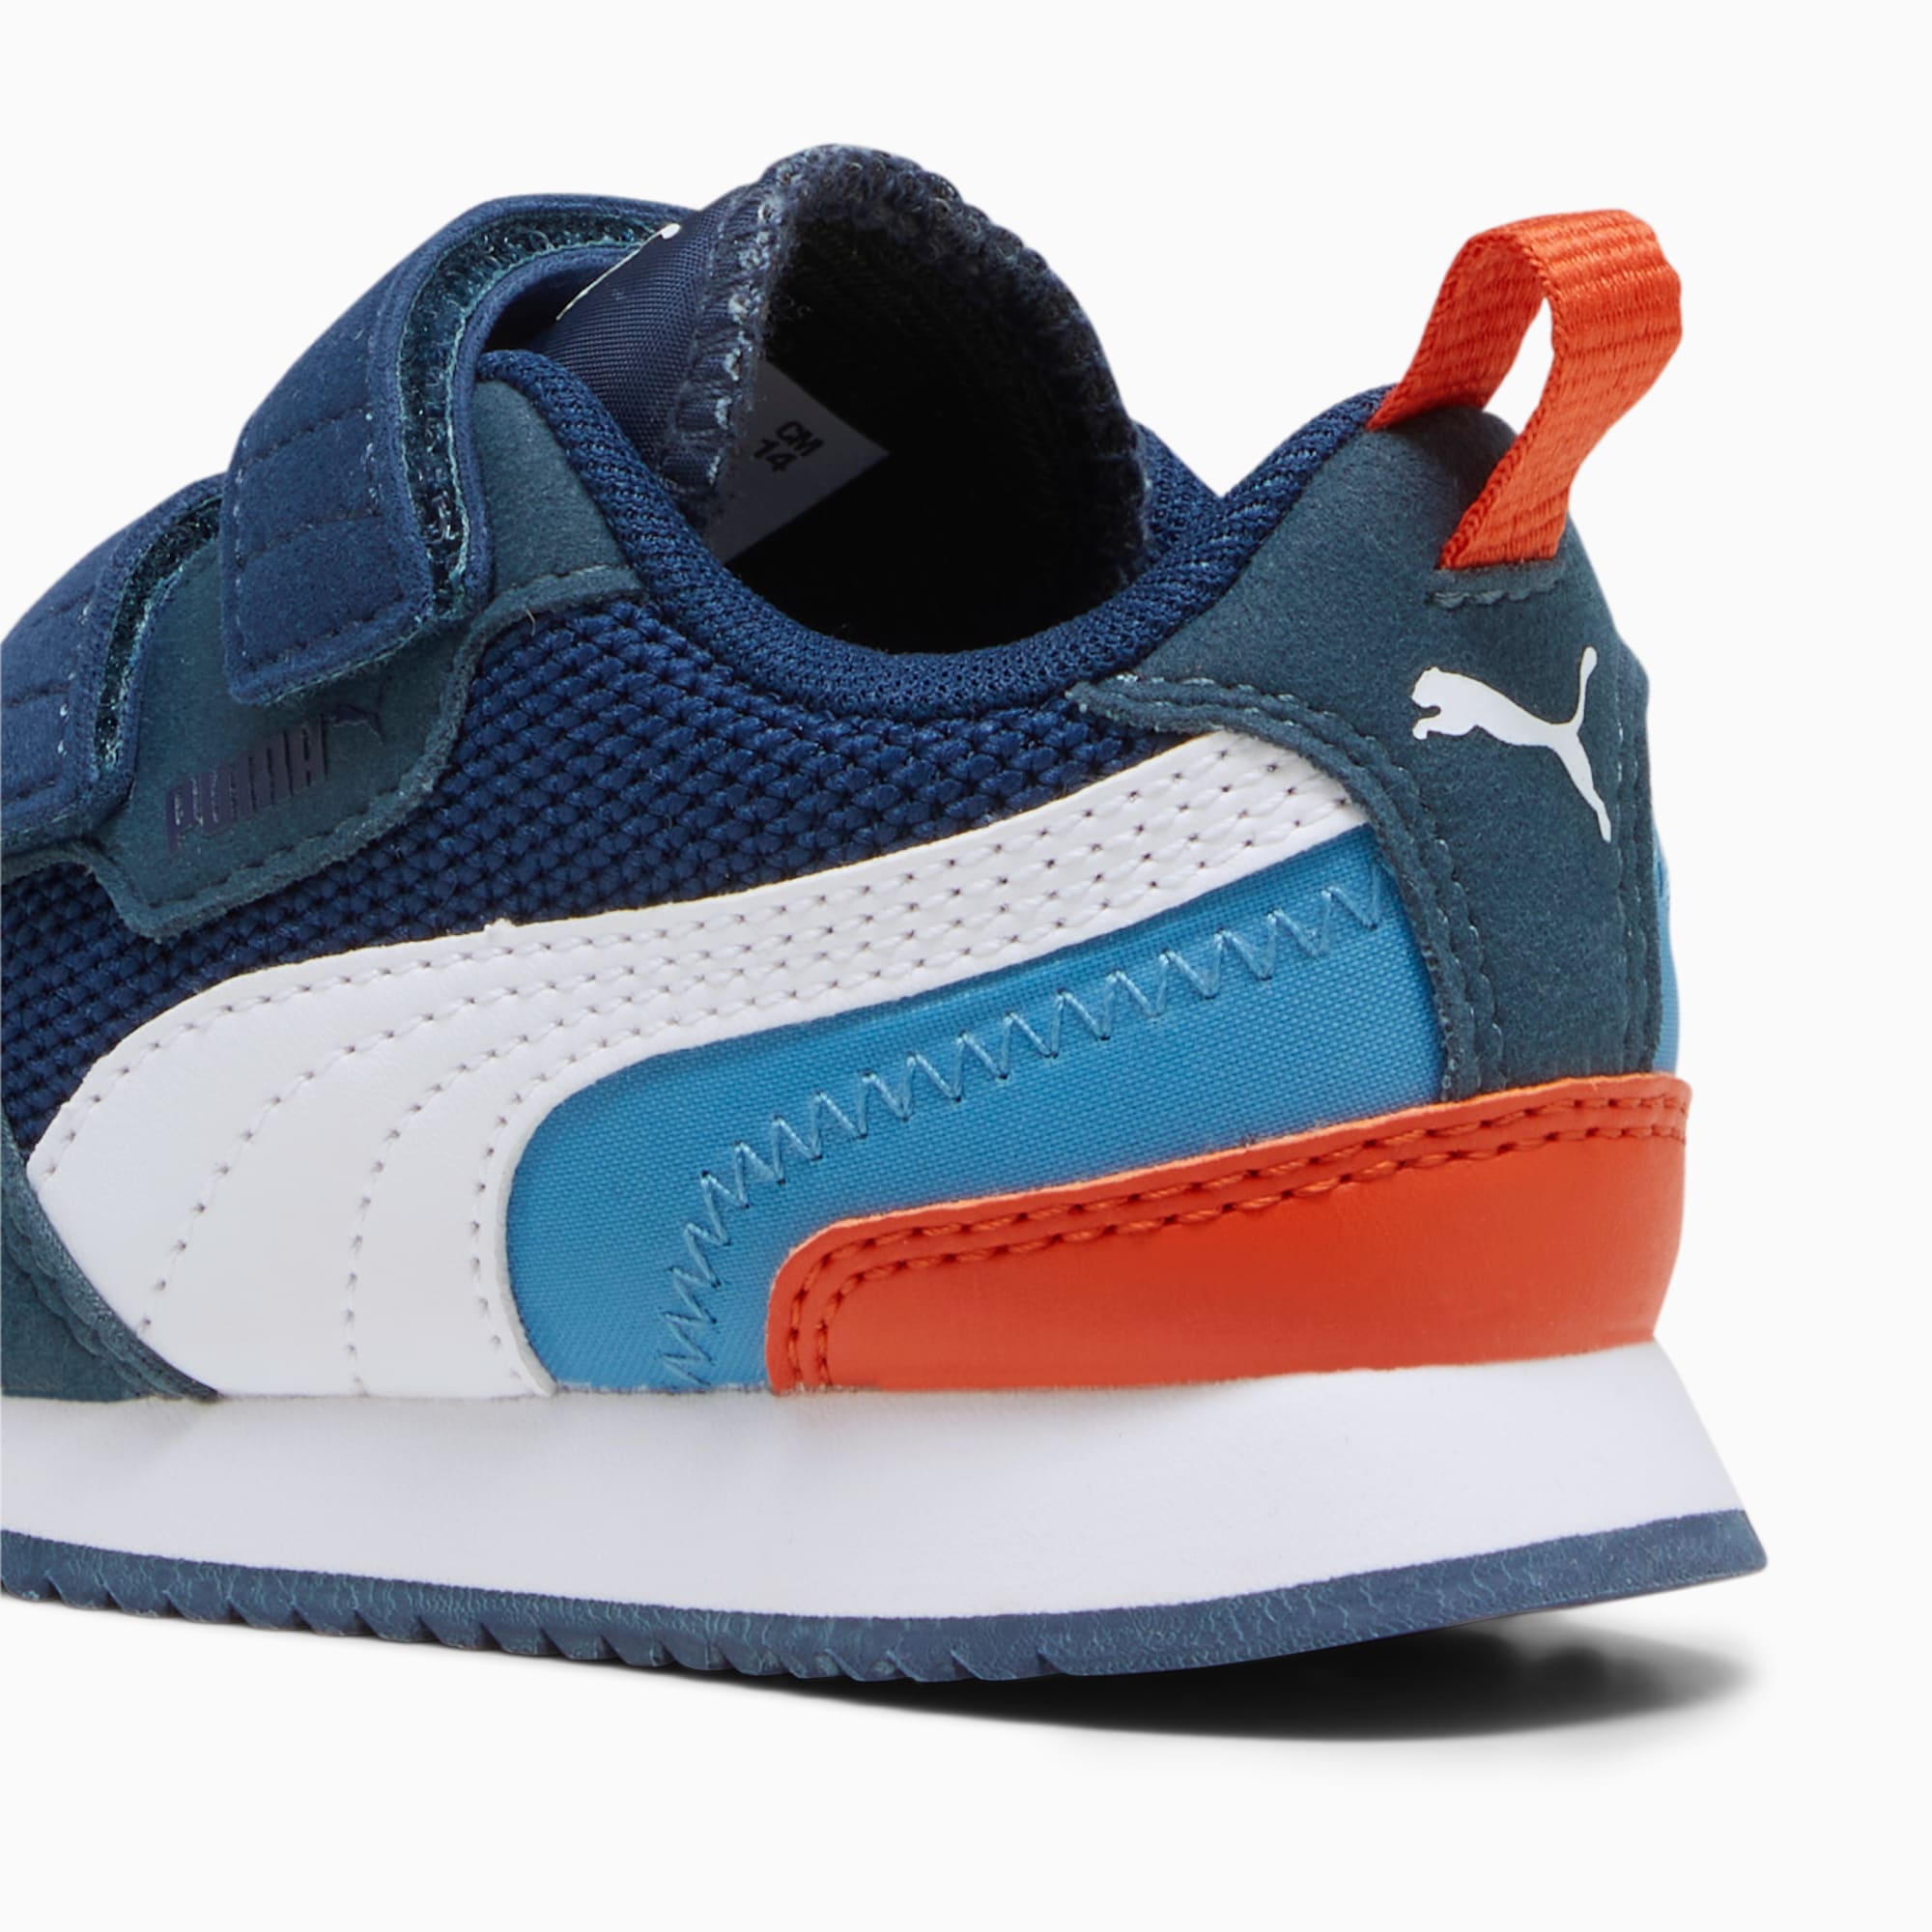 PUMA R78 Babies' Trainers, Persian Blue/White/Inky Blue, Size 19, Shoes